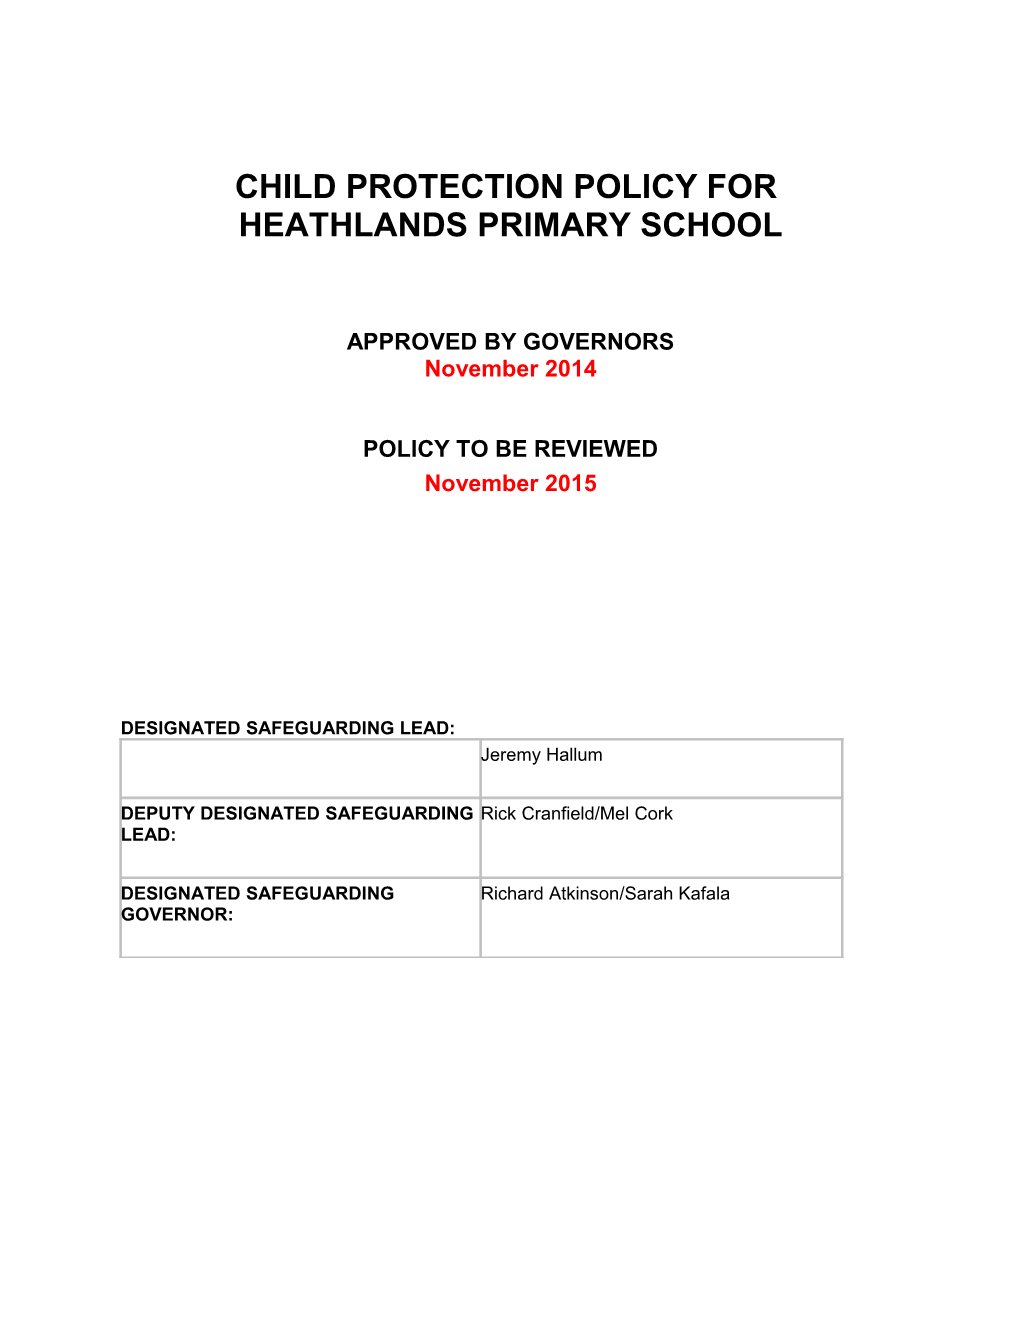 Child Protection Policy for Heathlands Primaryschool